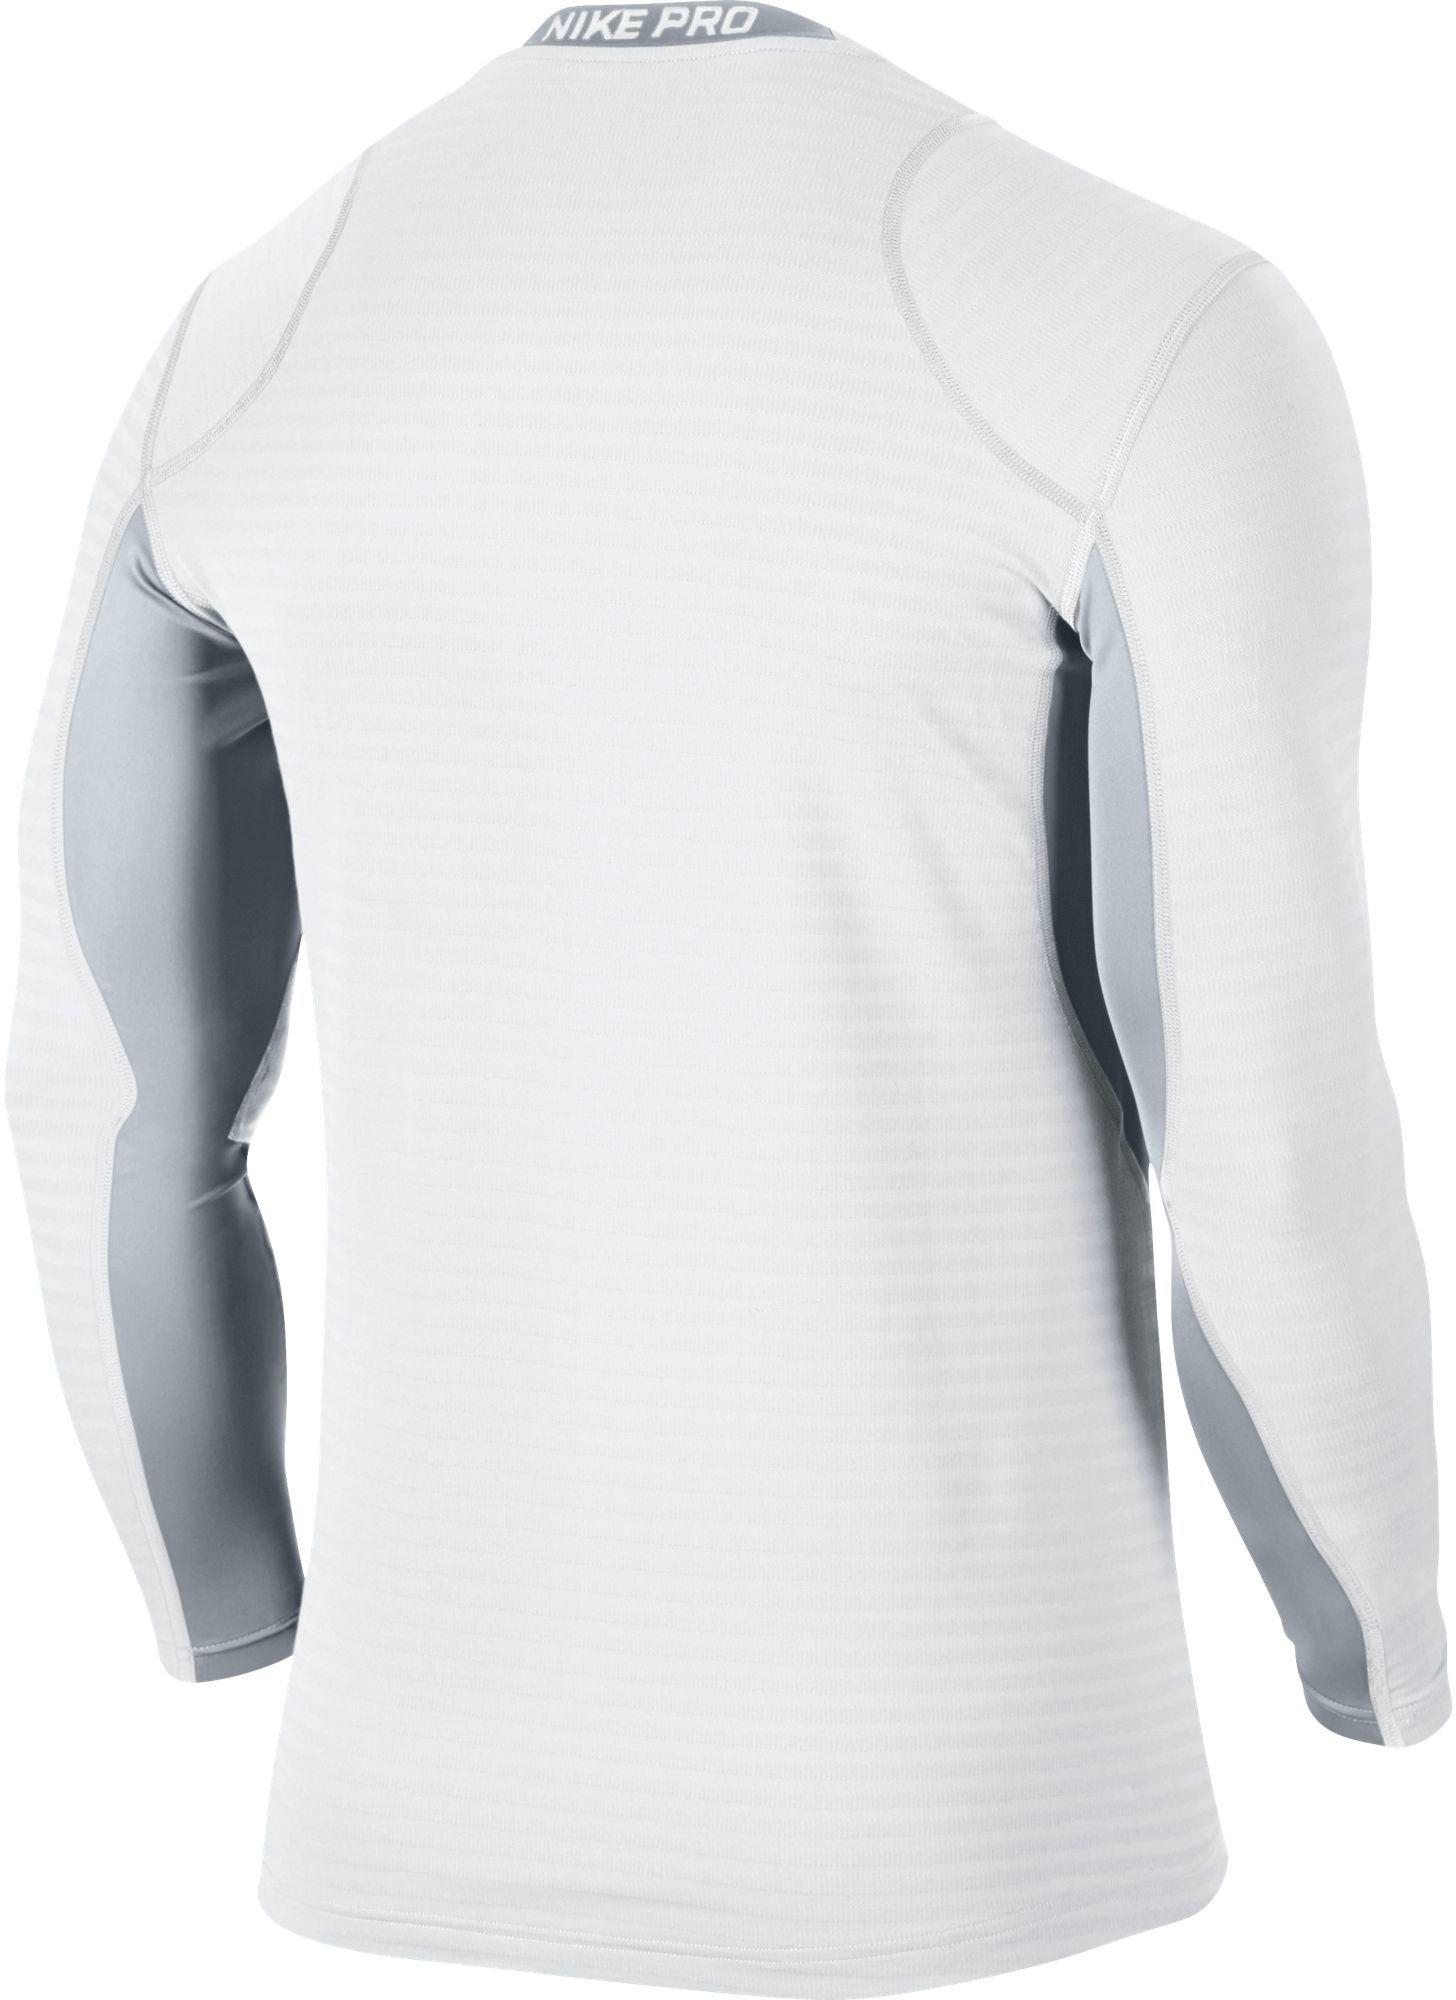 Lyst - Nike Pro Warm Long Sleeve Compression Shirt in White for Men